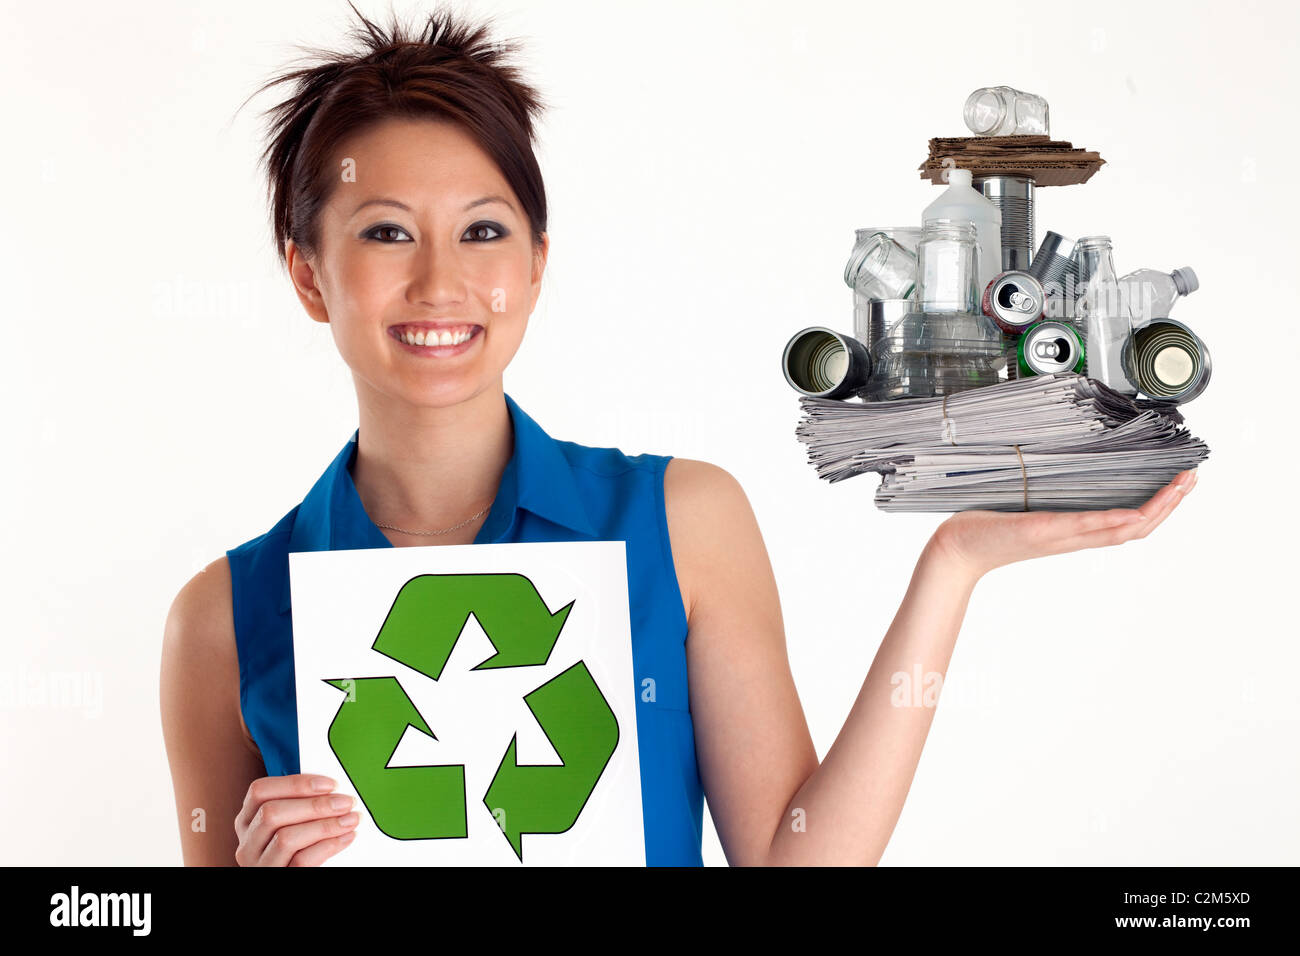 Pretty Asian Woman holding up a Recycle sign and recyclables Stock Photo